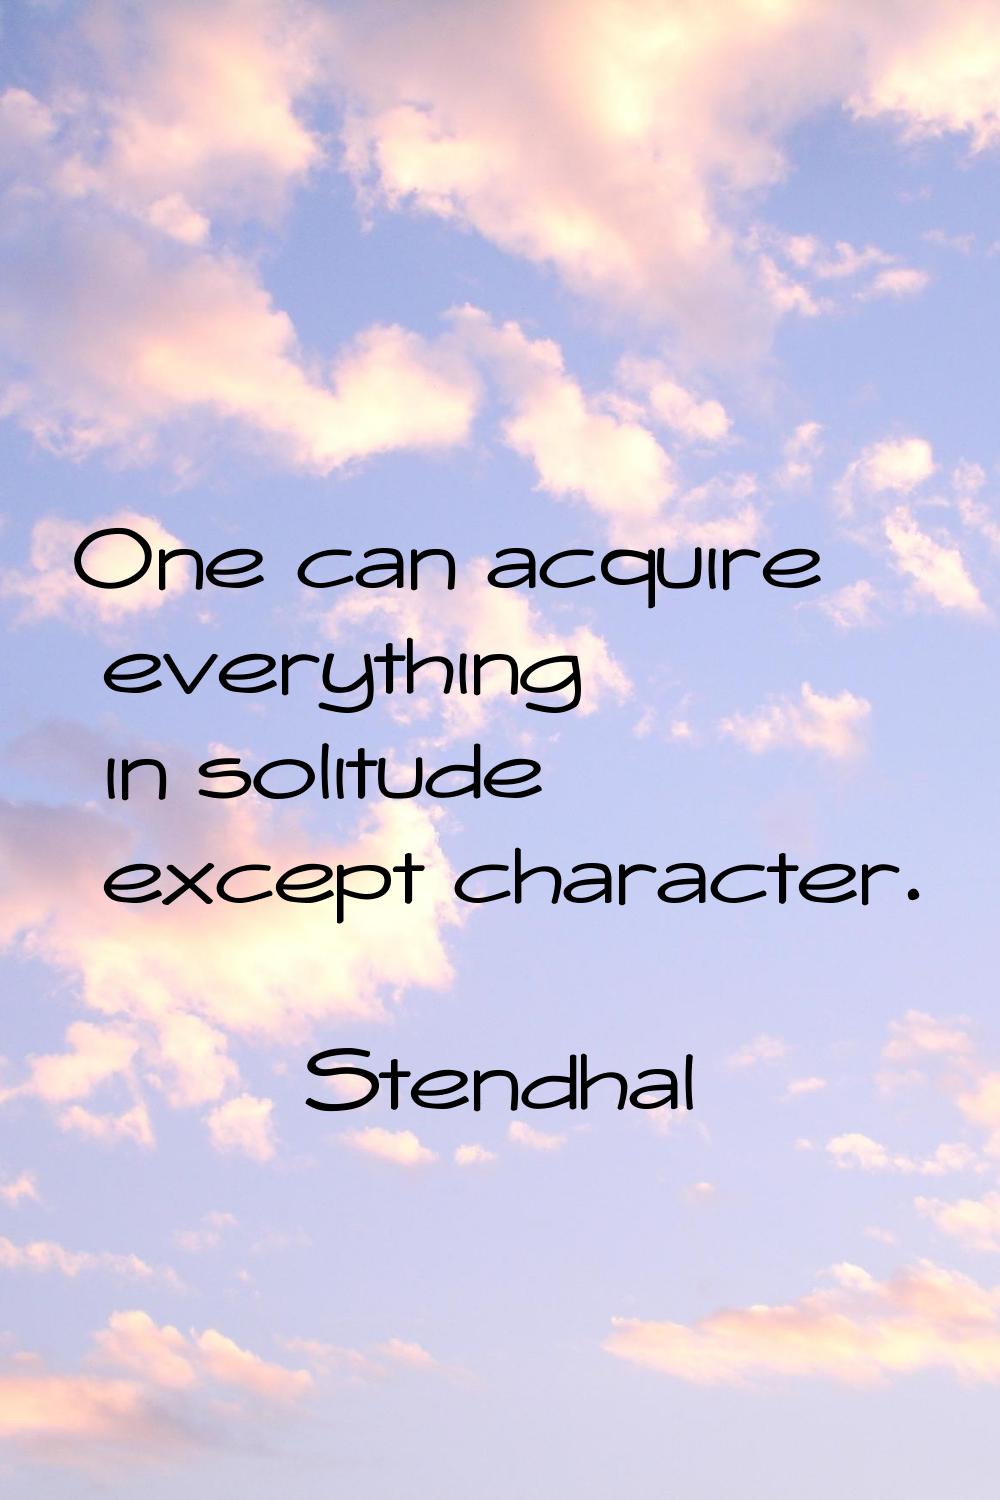 One can acquire everything in solitude except character.